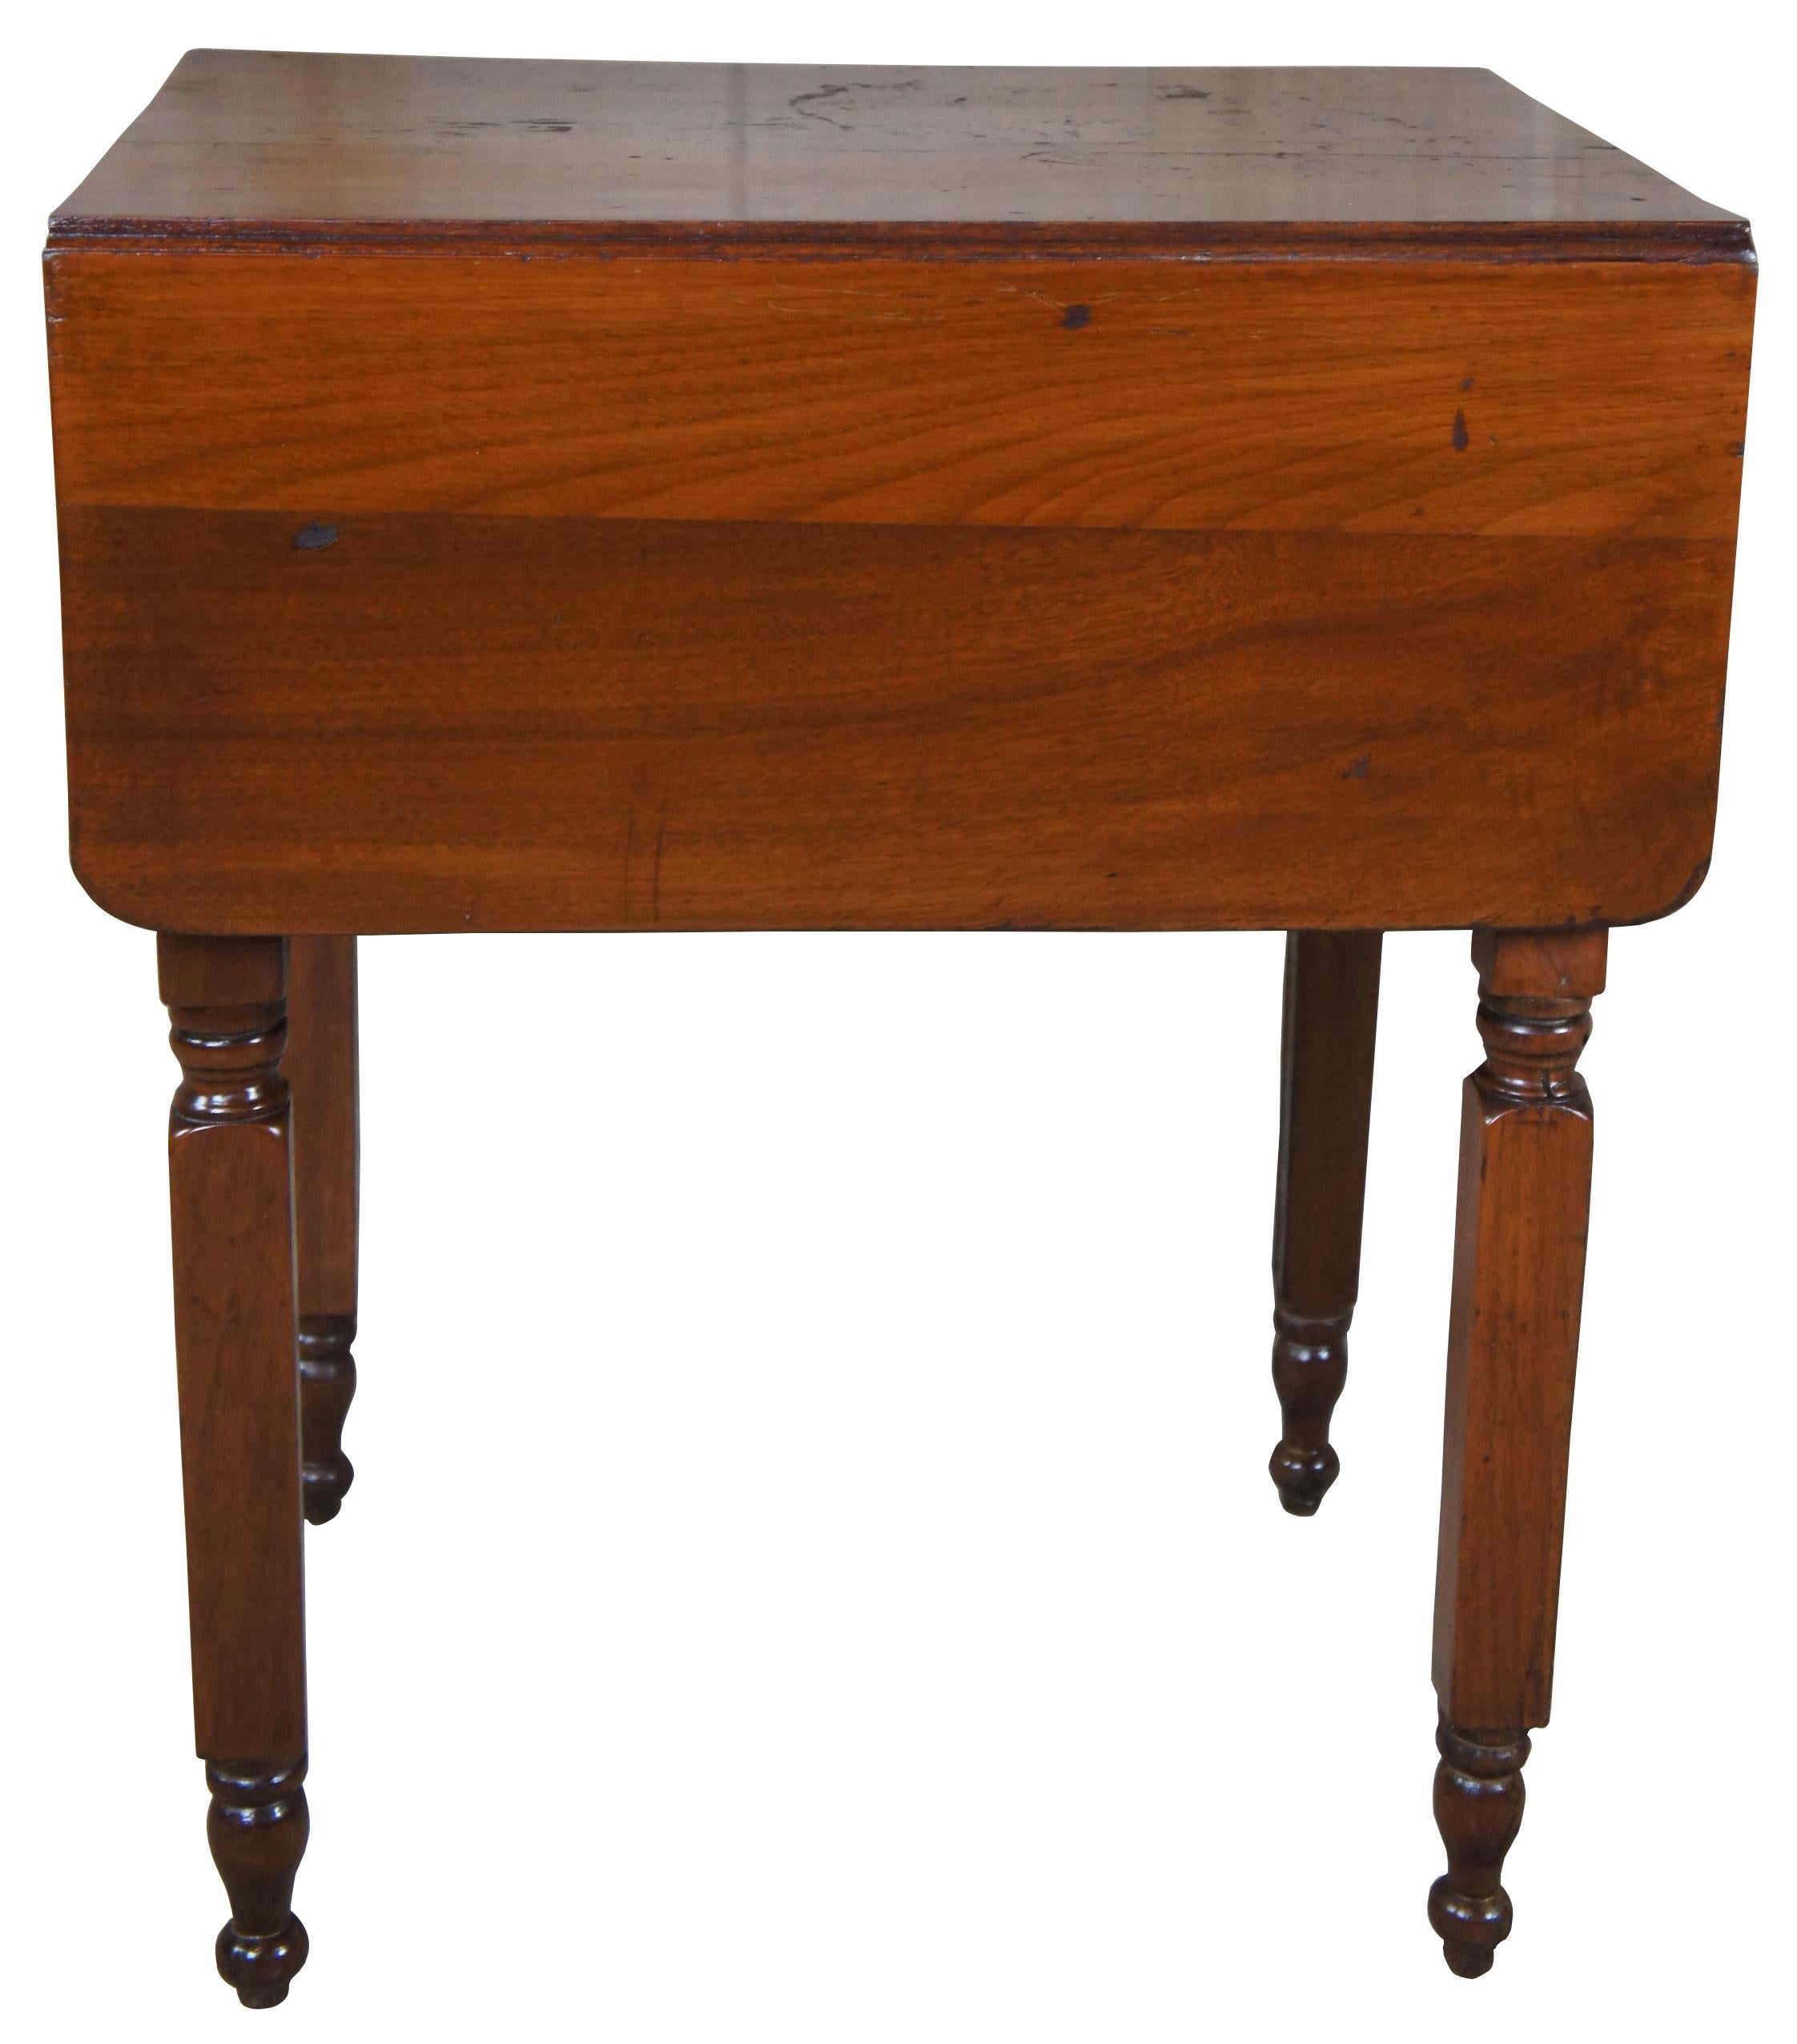 Mid-19th century Federal / early American style drop leaf side table. Features two hand dovetailed drawers with a crotch walnut veneer supported by four square legs leading to turned feet.

Opens to 38.5